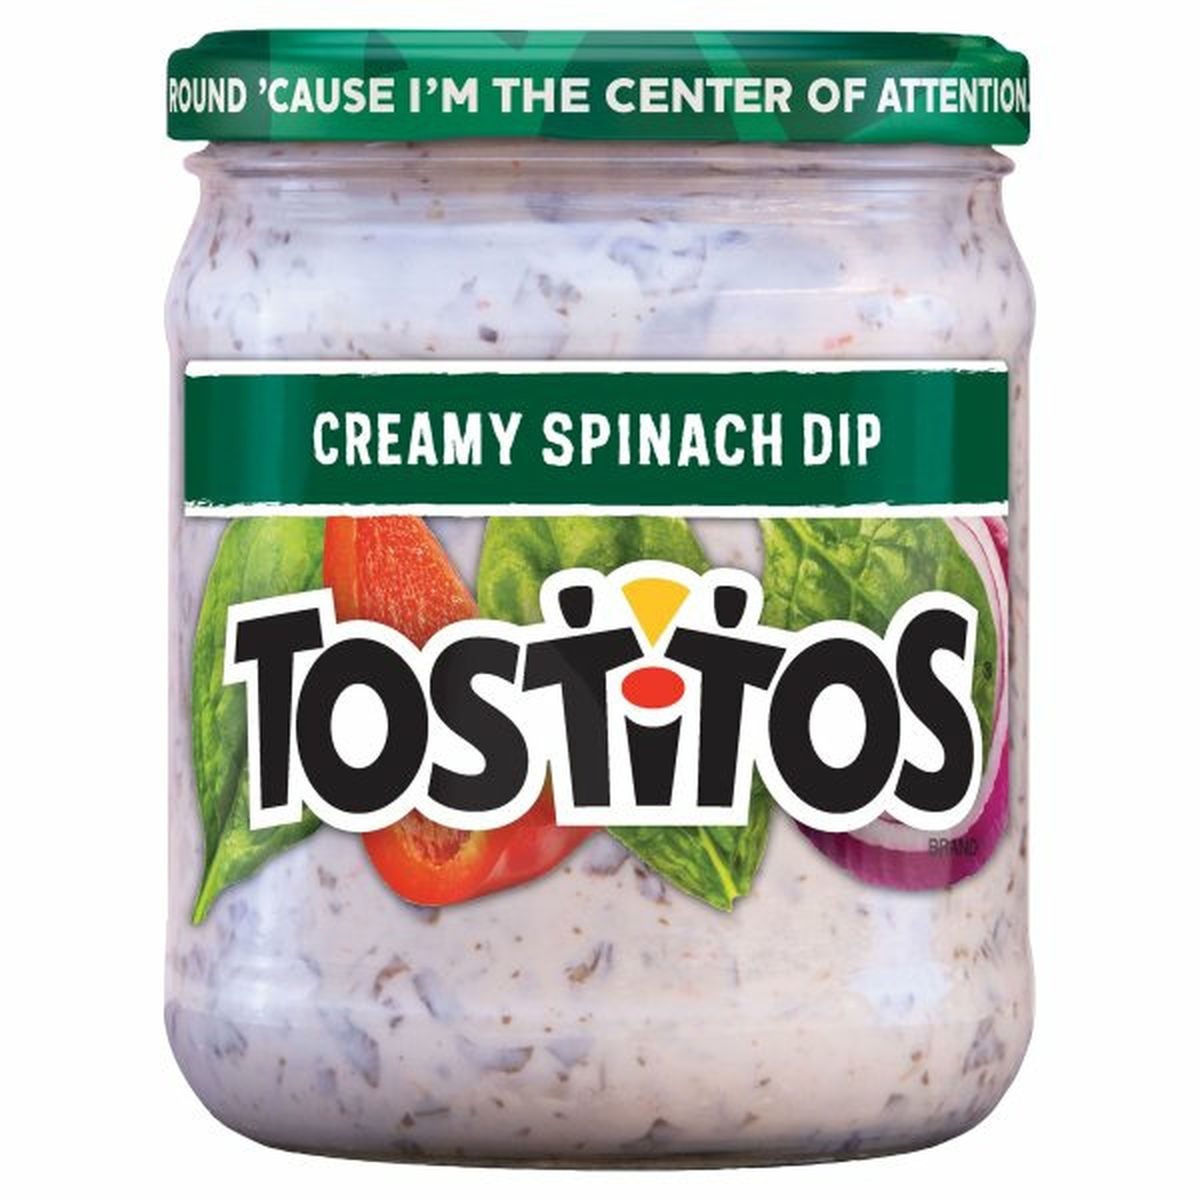 Calories in Tostitos Dip-shelf stable, Creamy Spinach